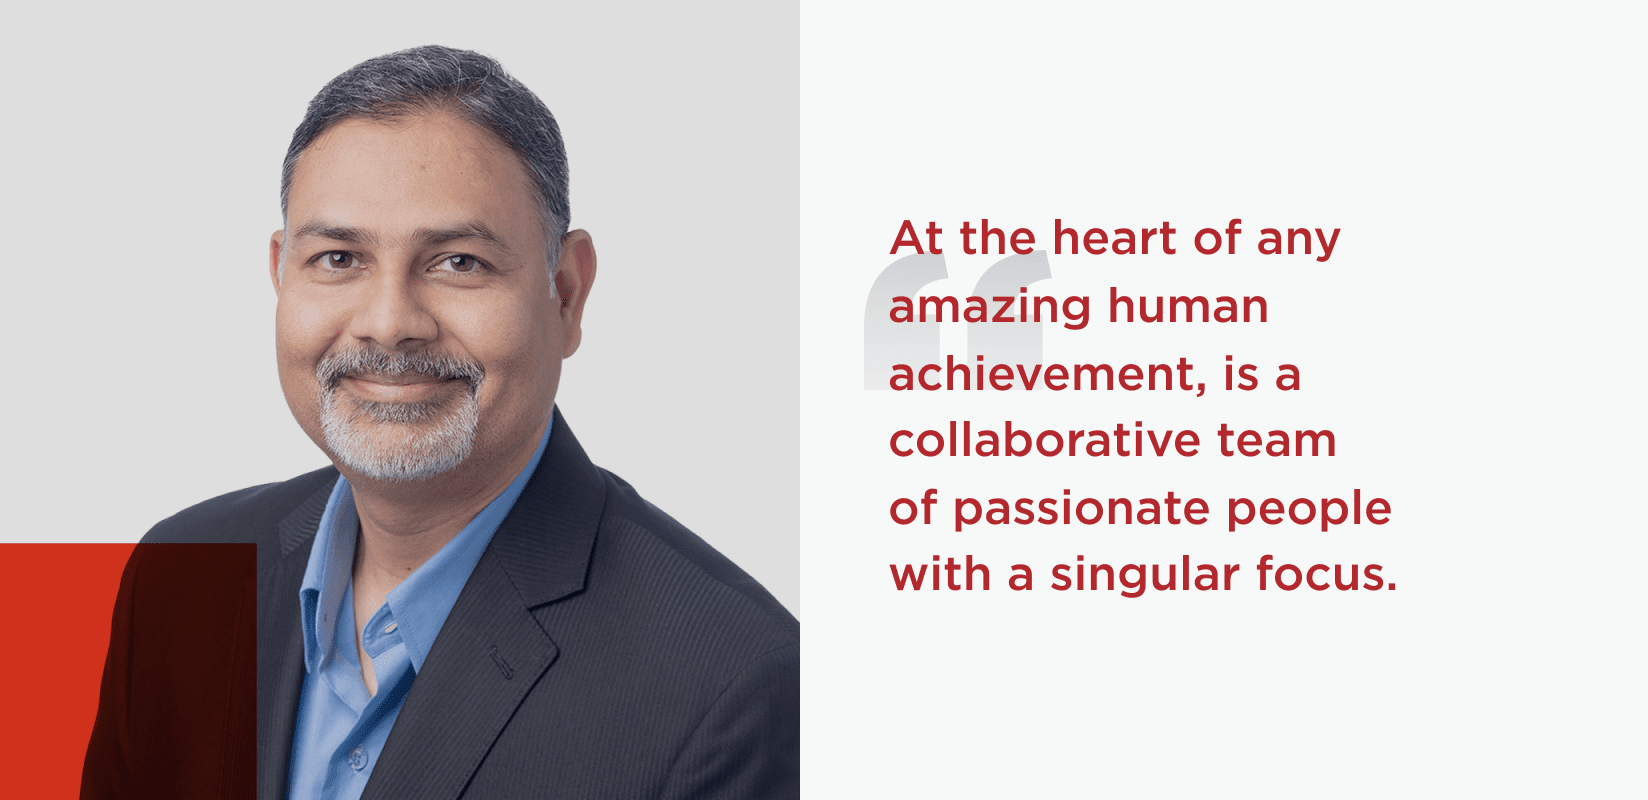 Quote from Rakesh Thaker, Chief Development Officer. At the heart of any amazing human achievement, is a collaborative team of passionate people with a singular focus.